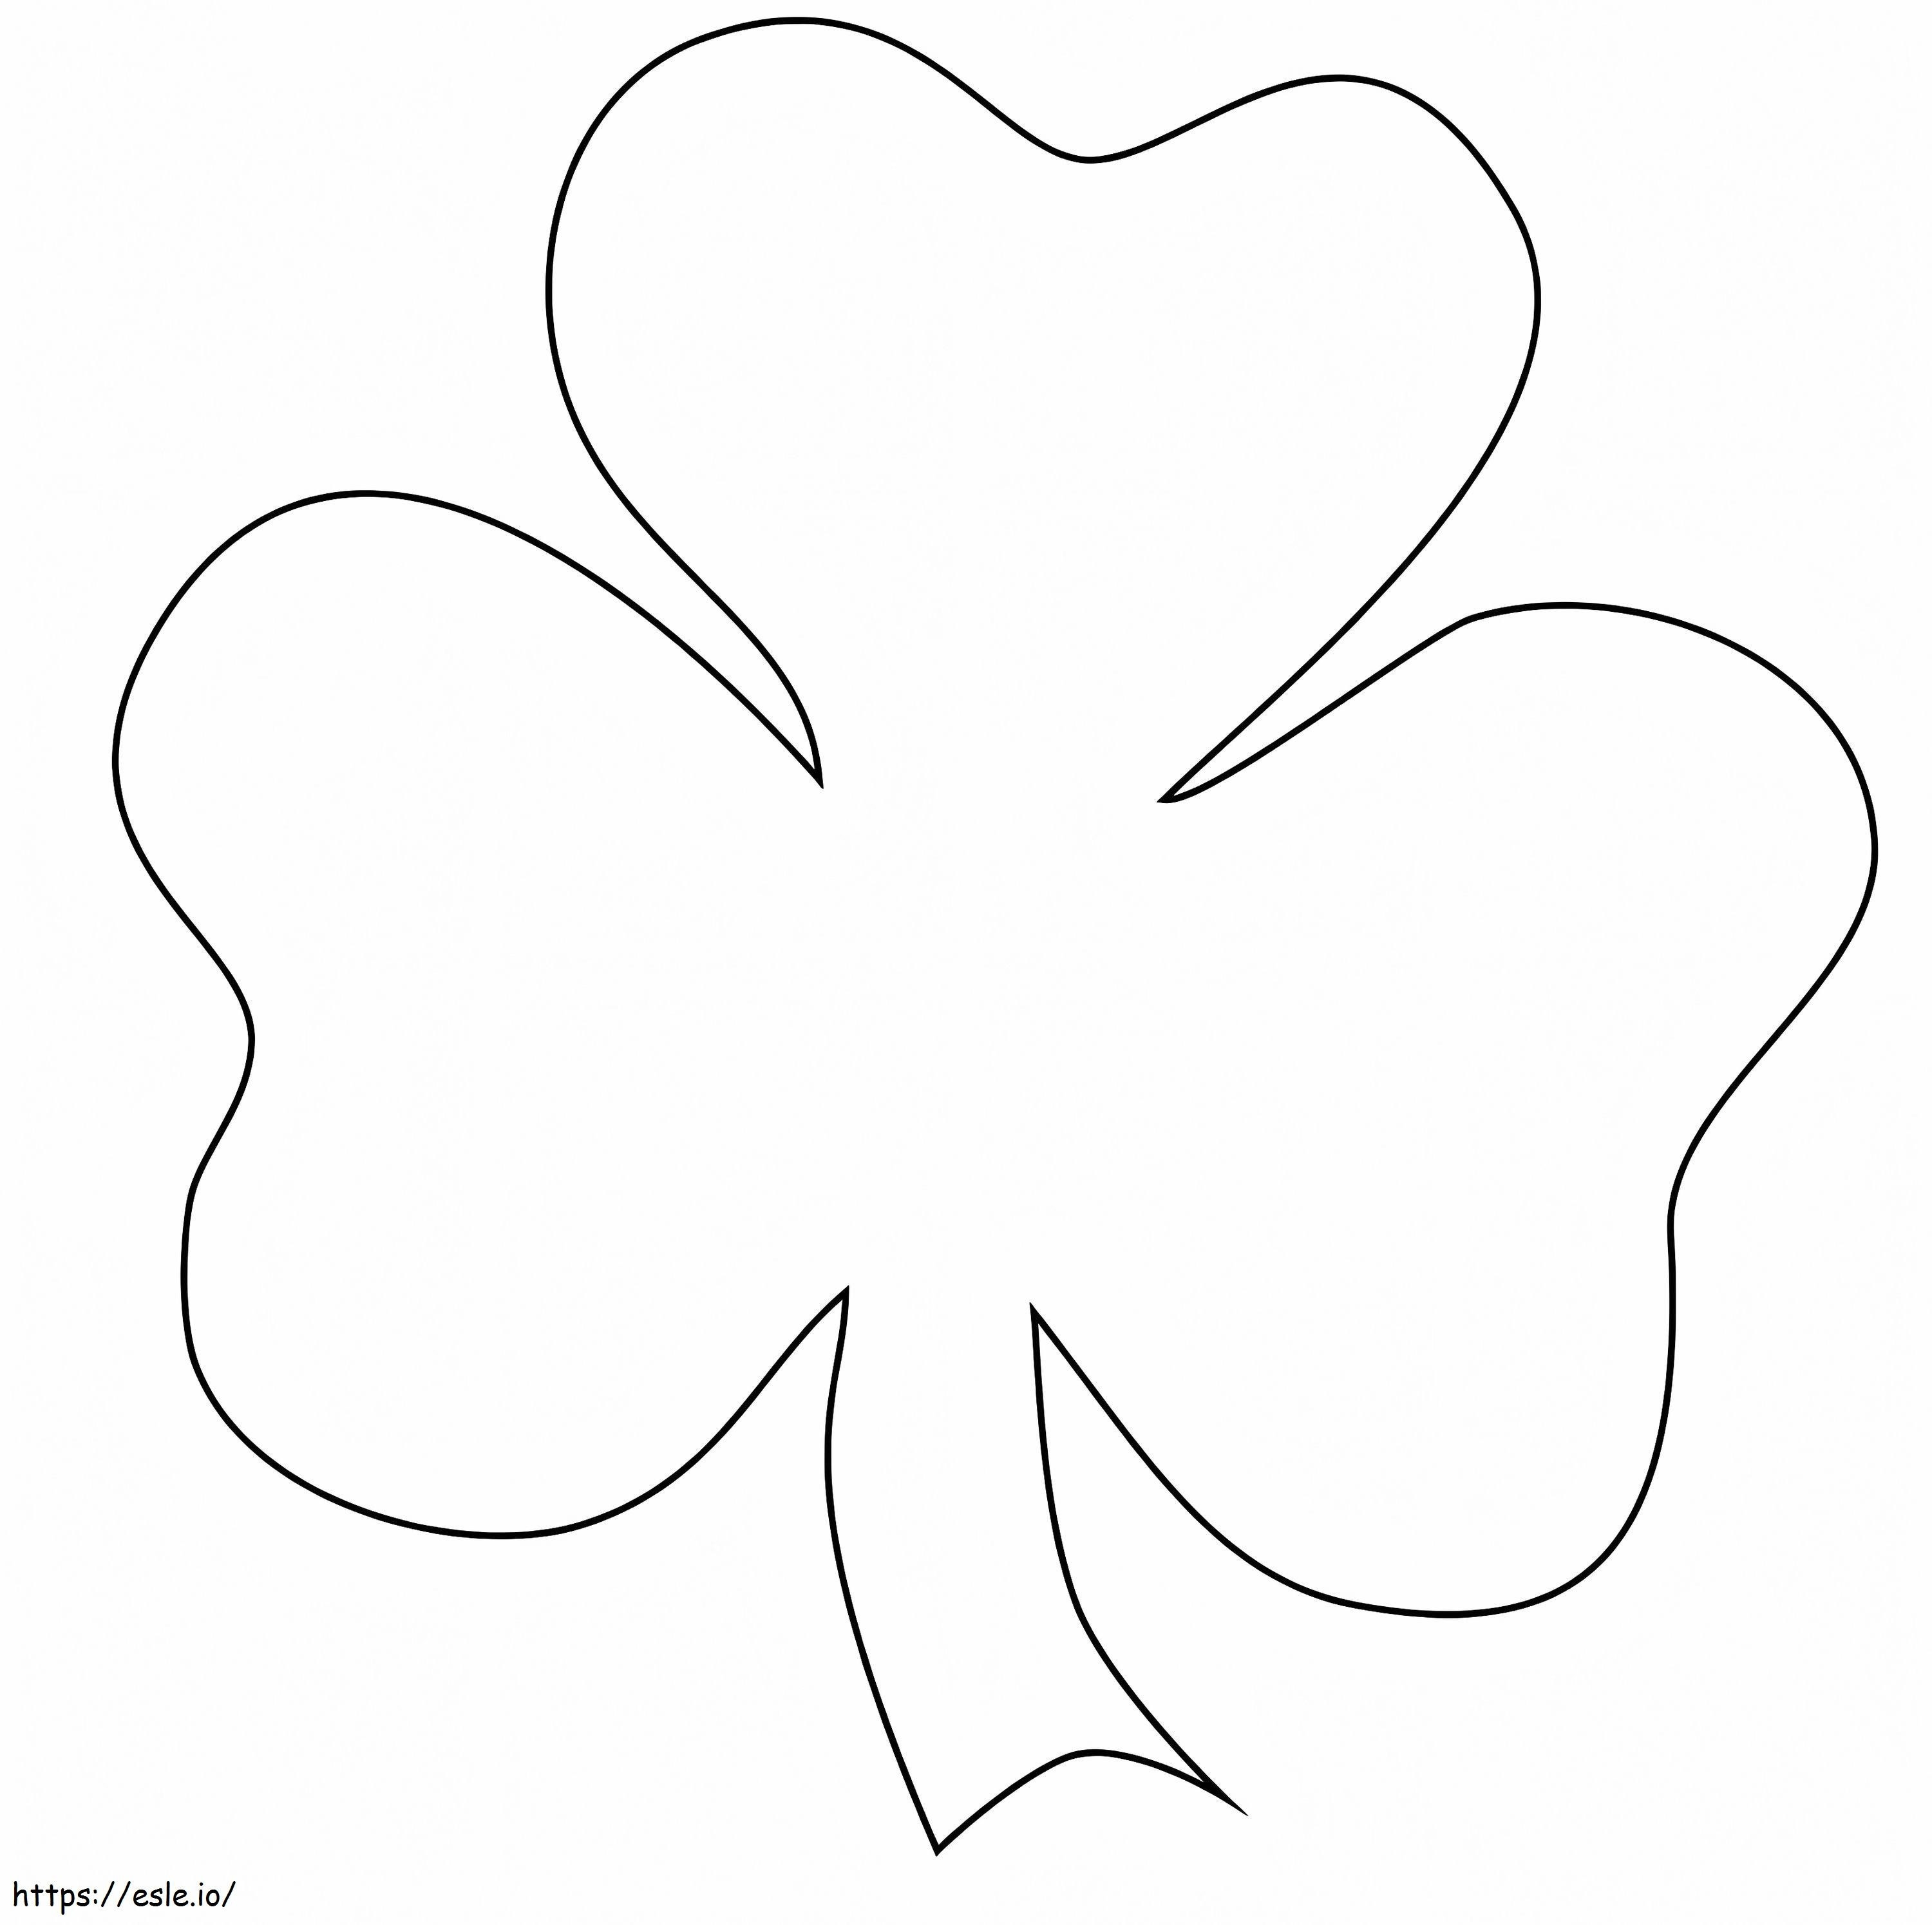 Very Simple Shamrock coloring page